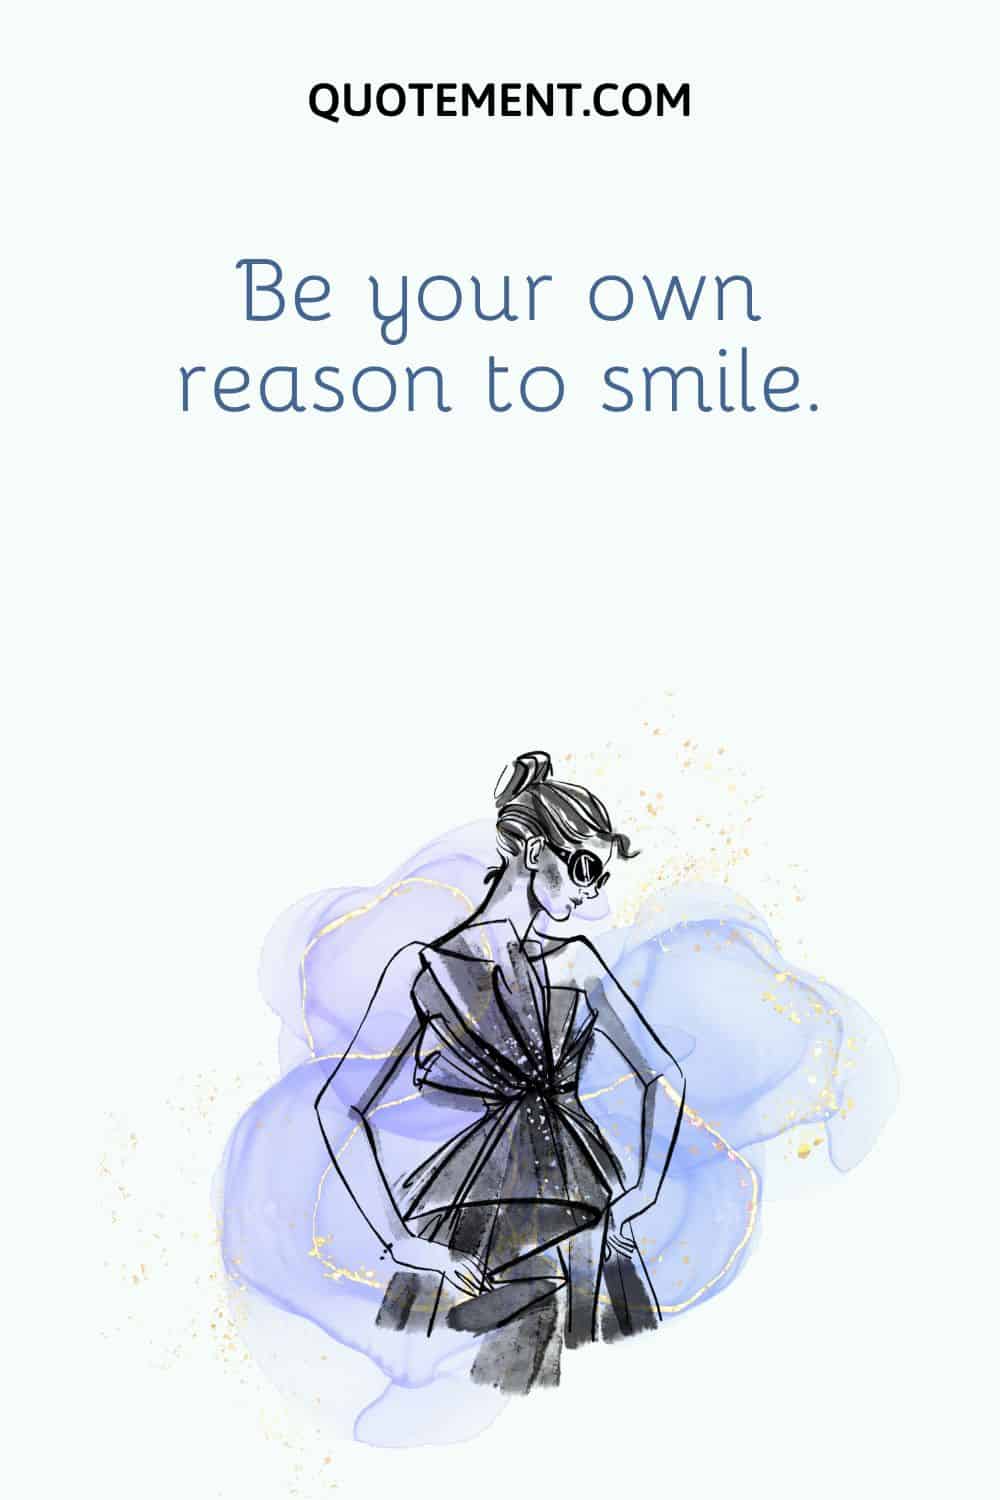 Be your own reason to smile